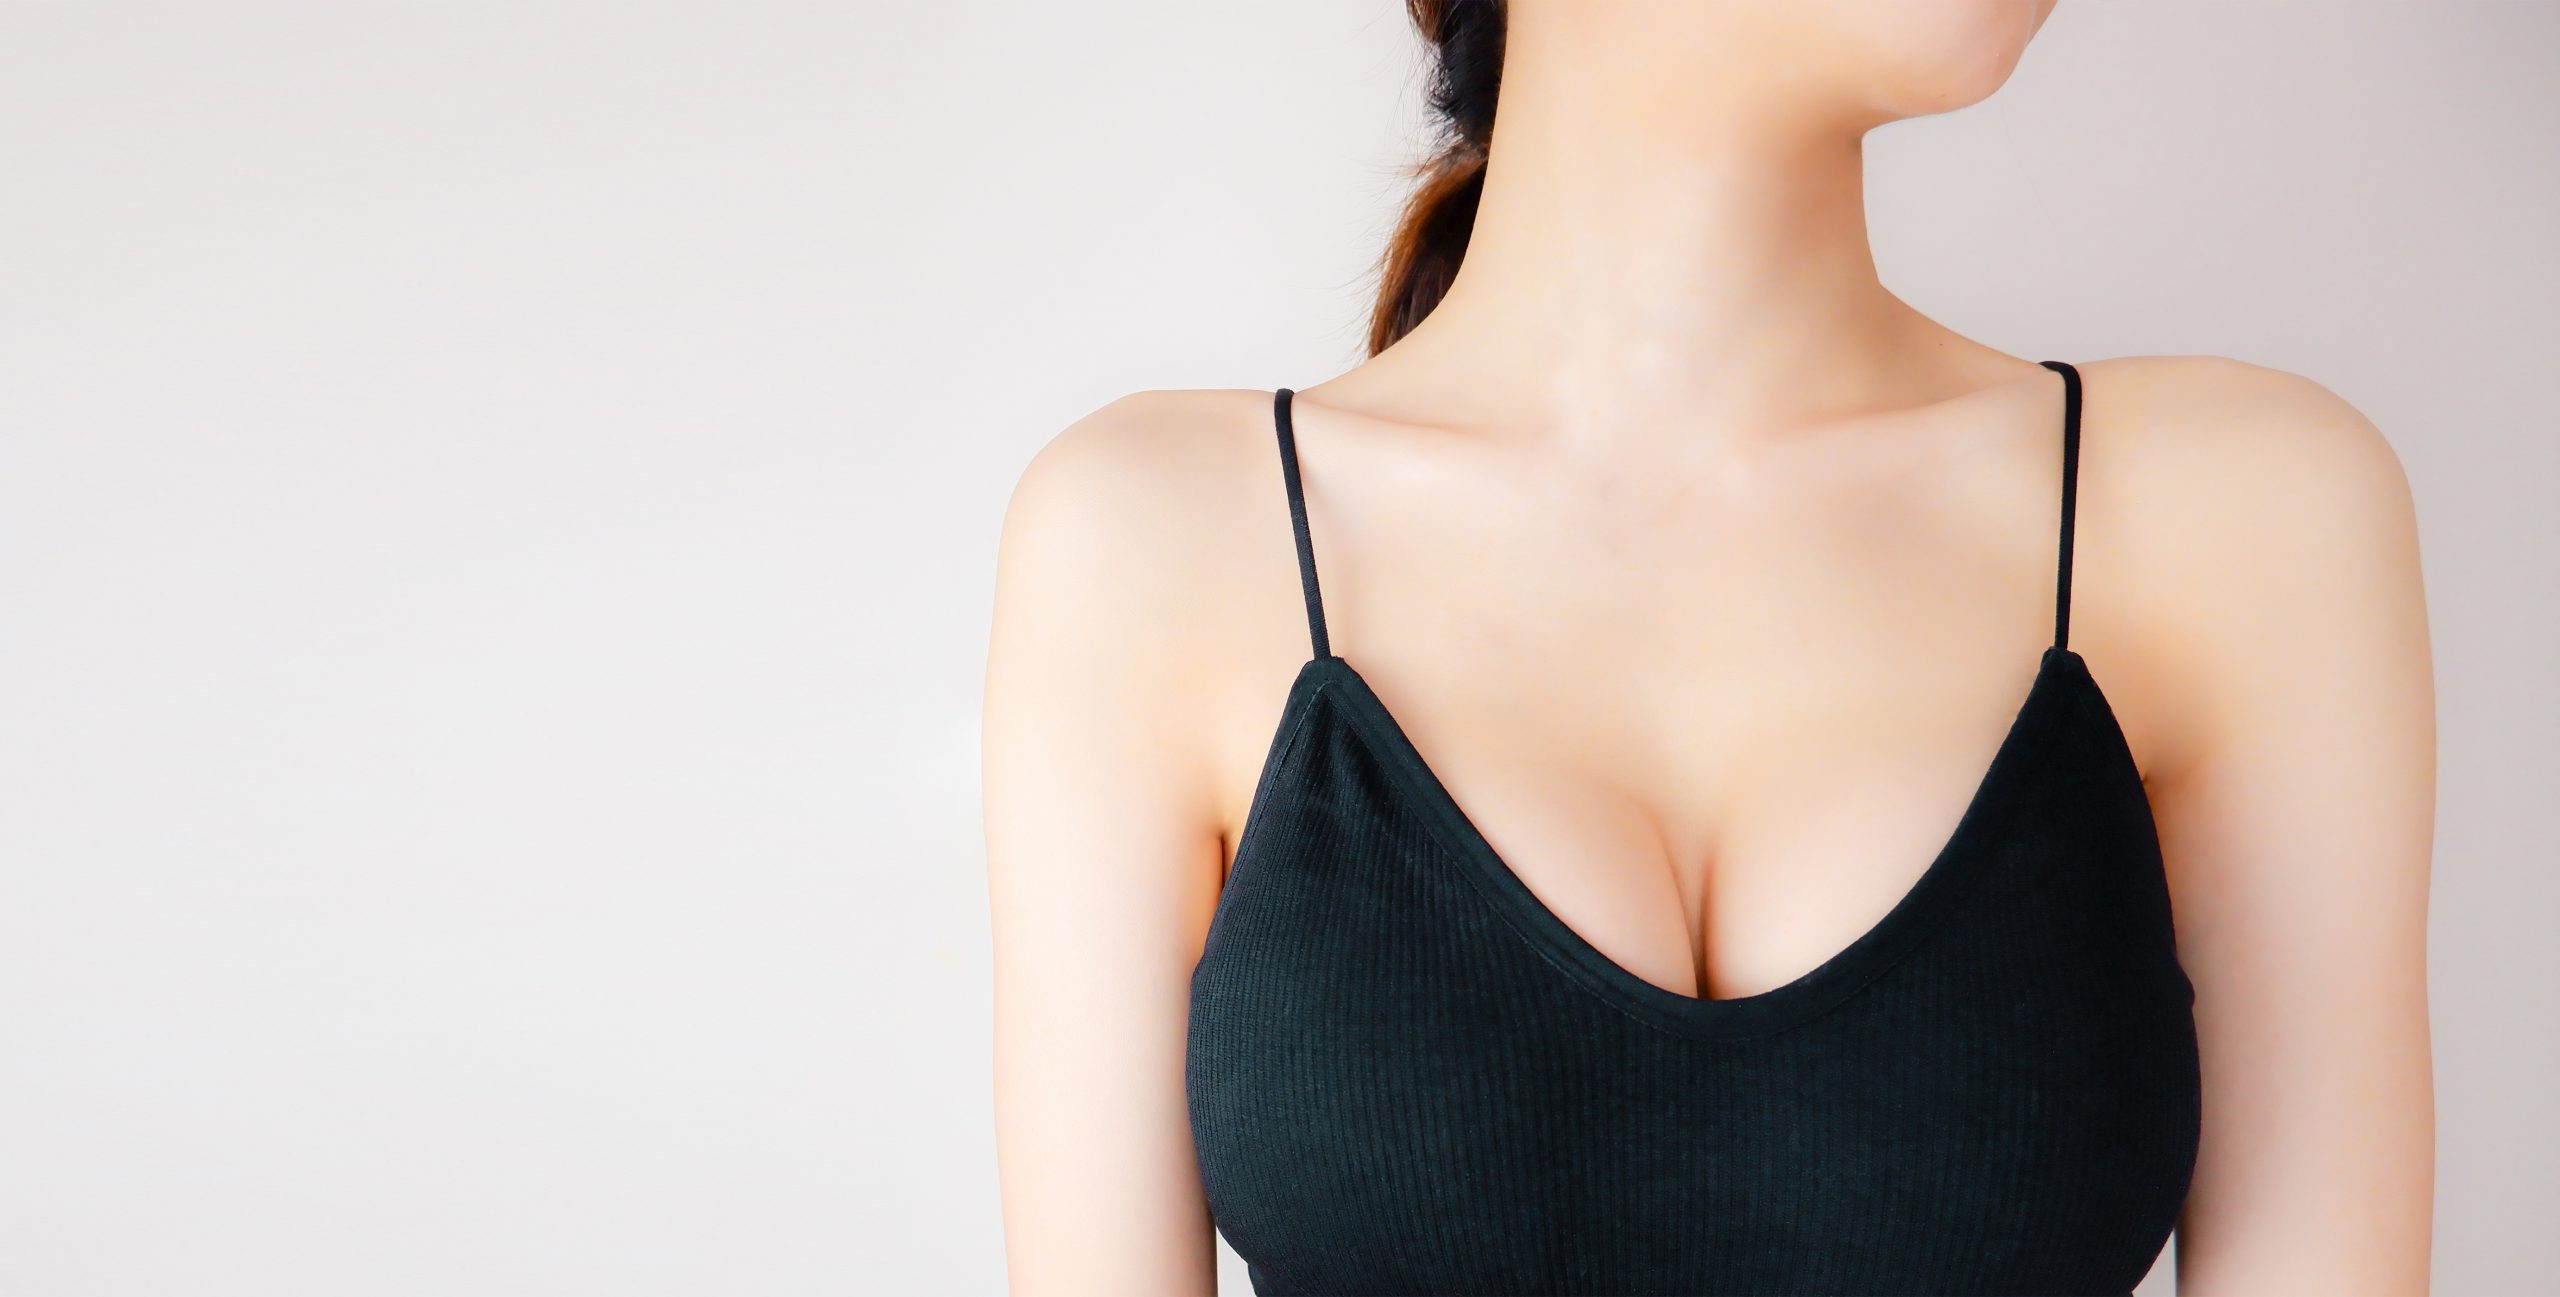 March 2020 Procedure of the Month: Let’s Talk About Breasts